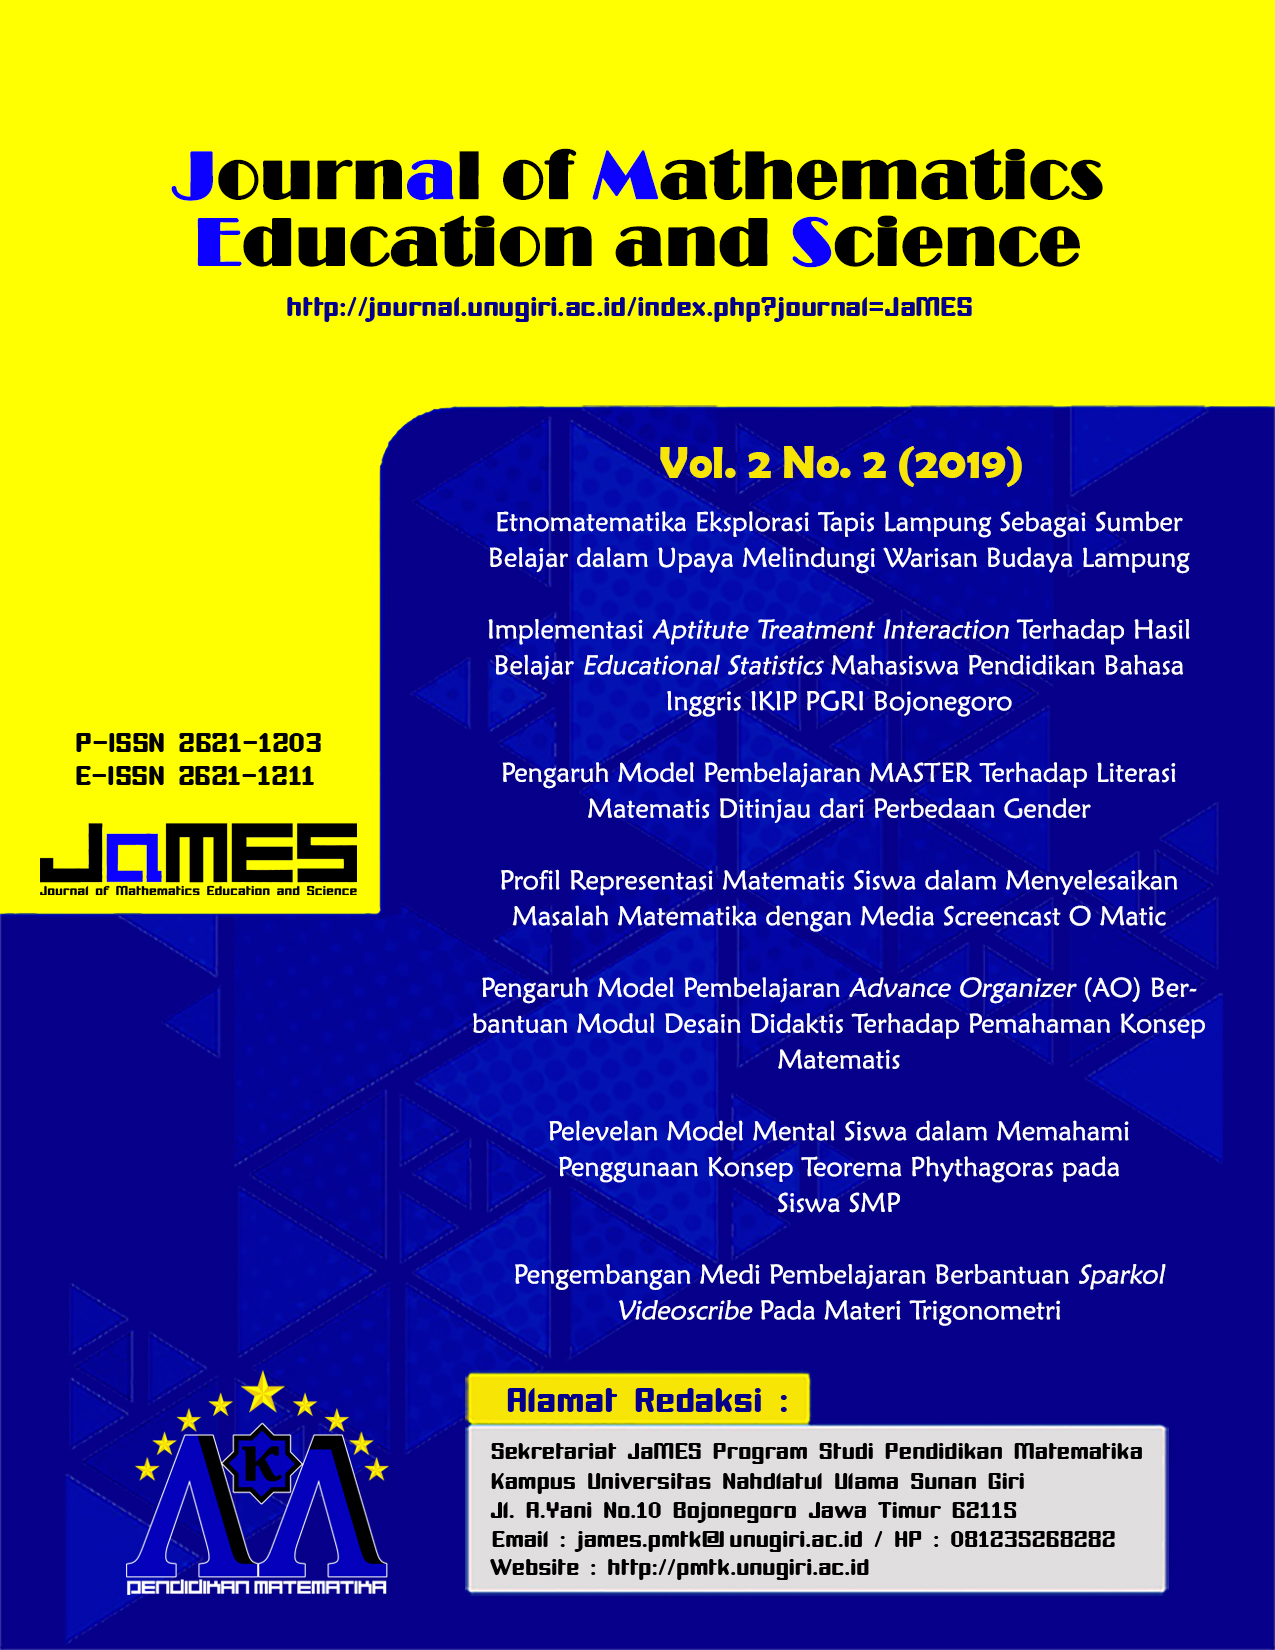 					View Vol. 2 No. 2 (2019): Journal of Mathematics Education and Science
				